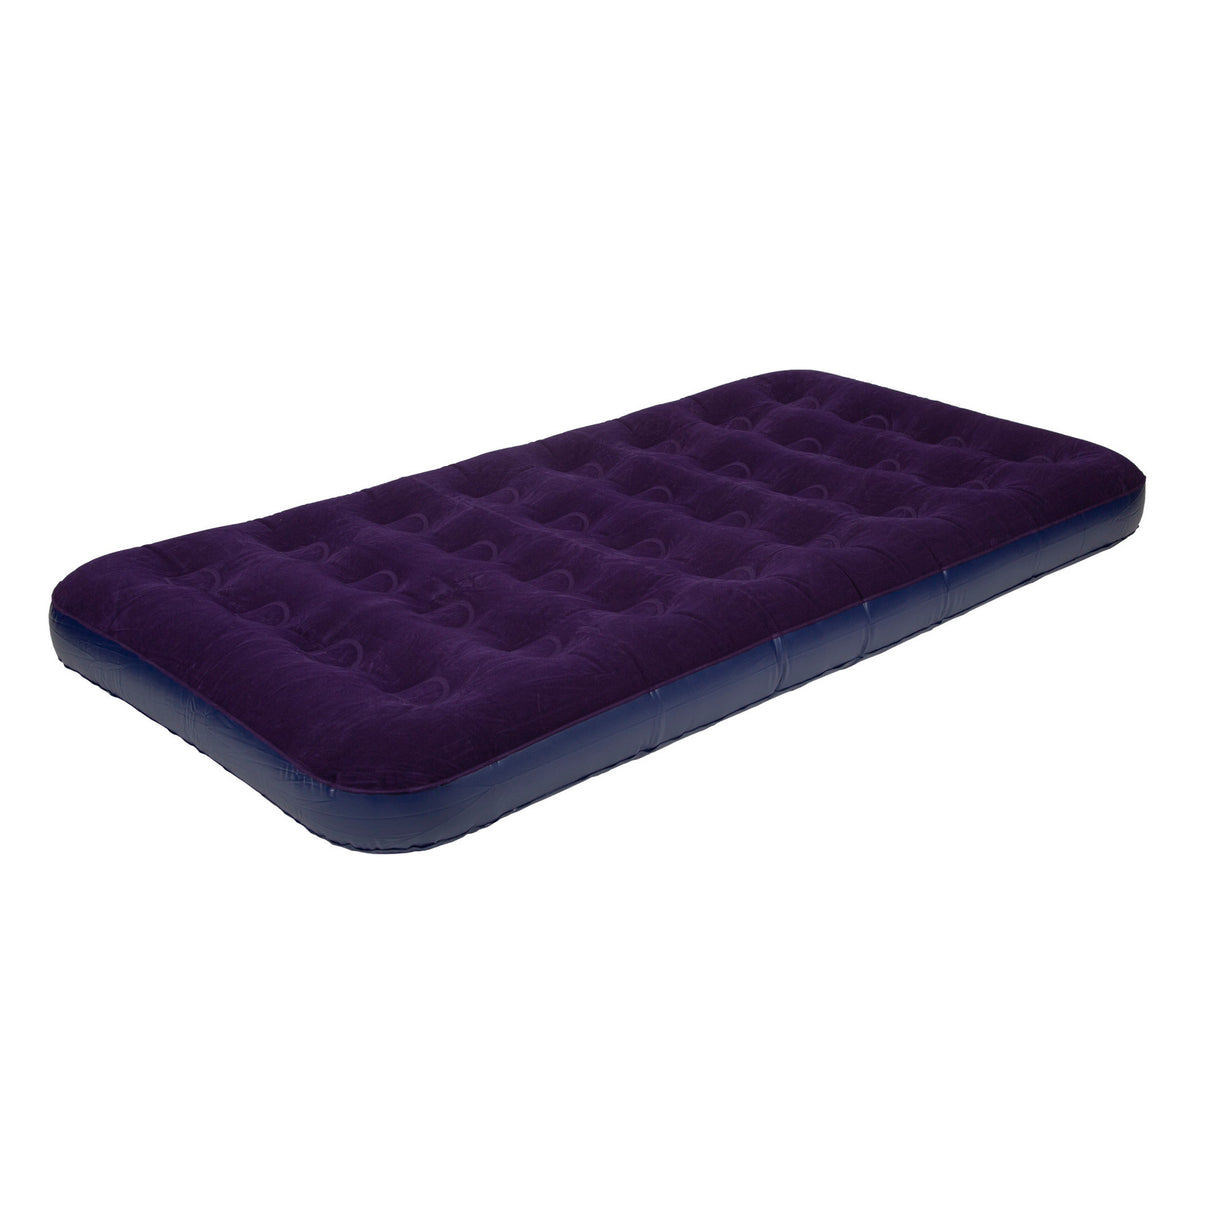 STANSPORT AIR BED - TWO SIZES : TWIN AND QUEEN